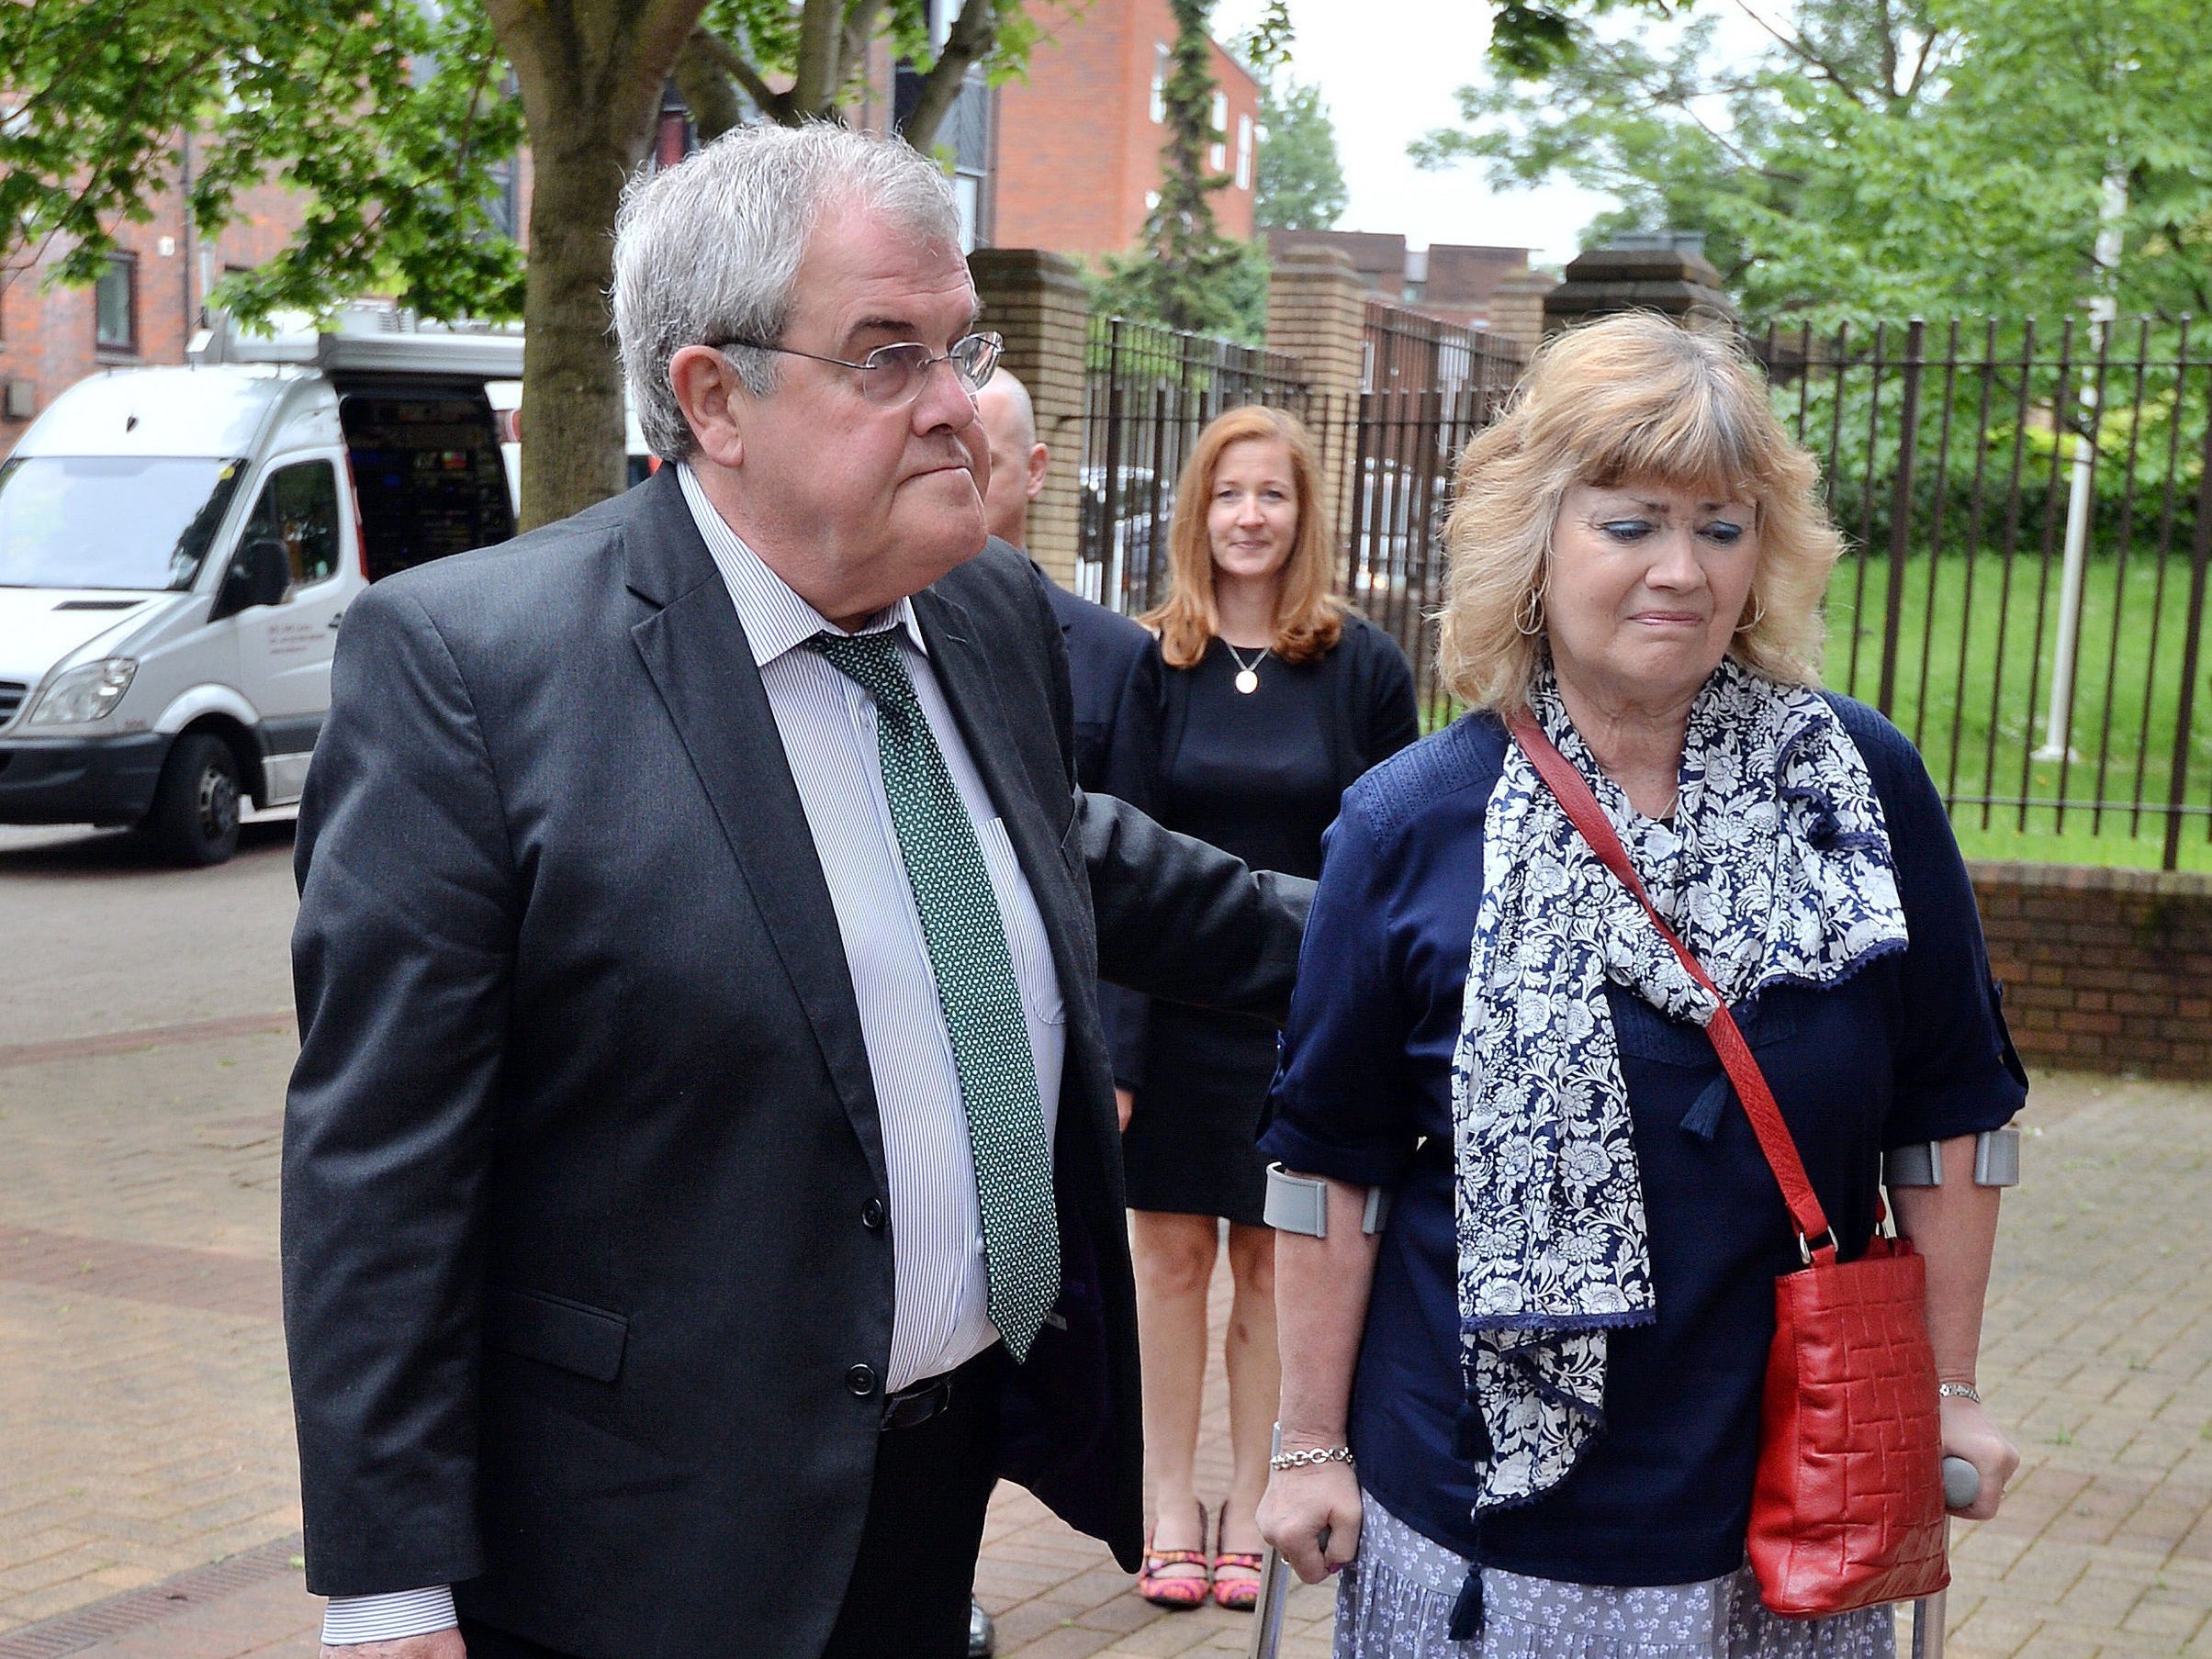 Des and Doreen James, parents of Private Cheryl James, arrive at Woking Coroner's Court in Surrey